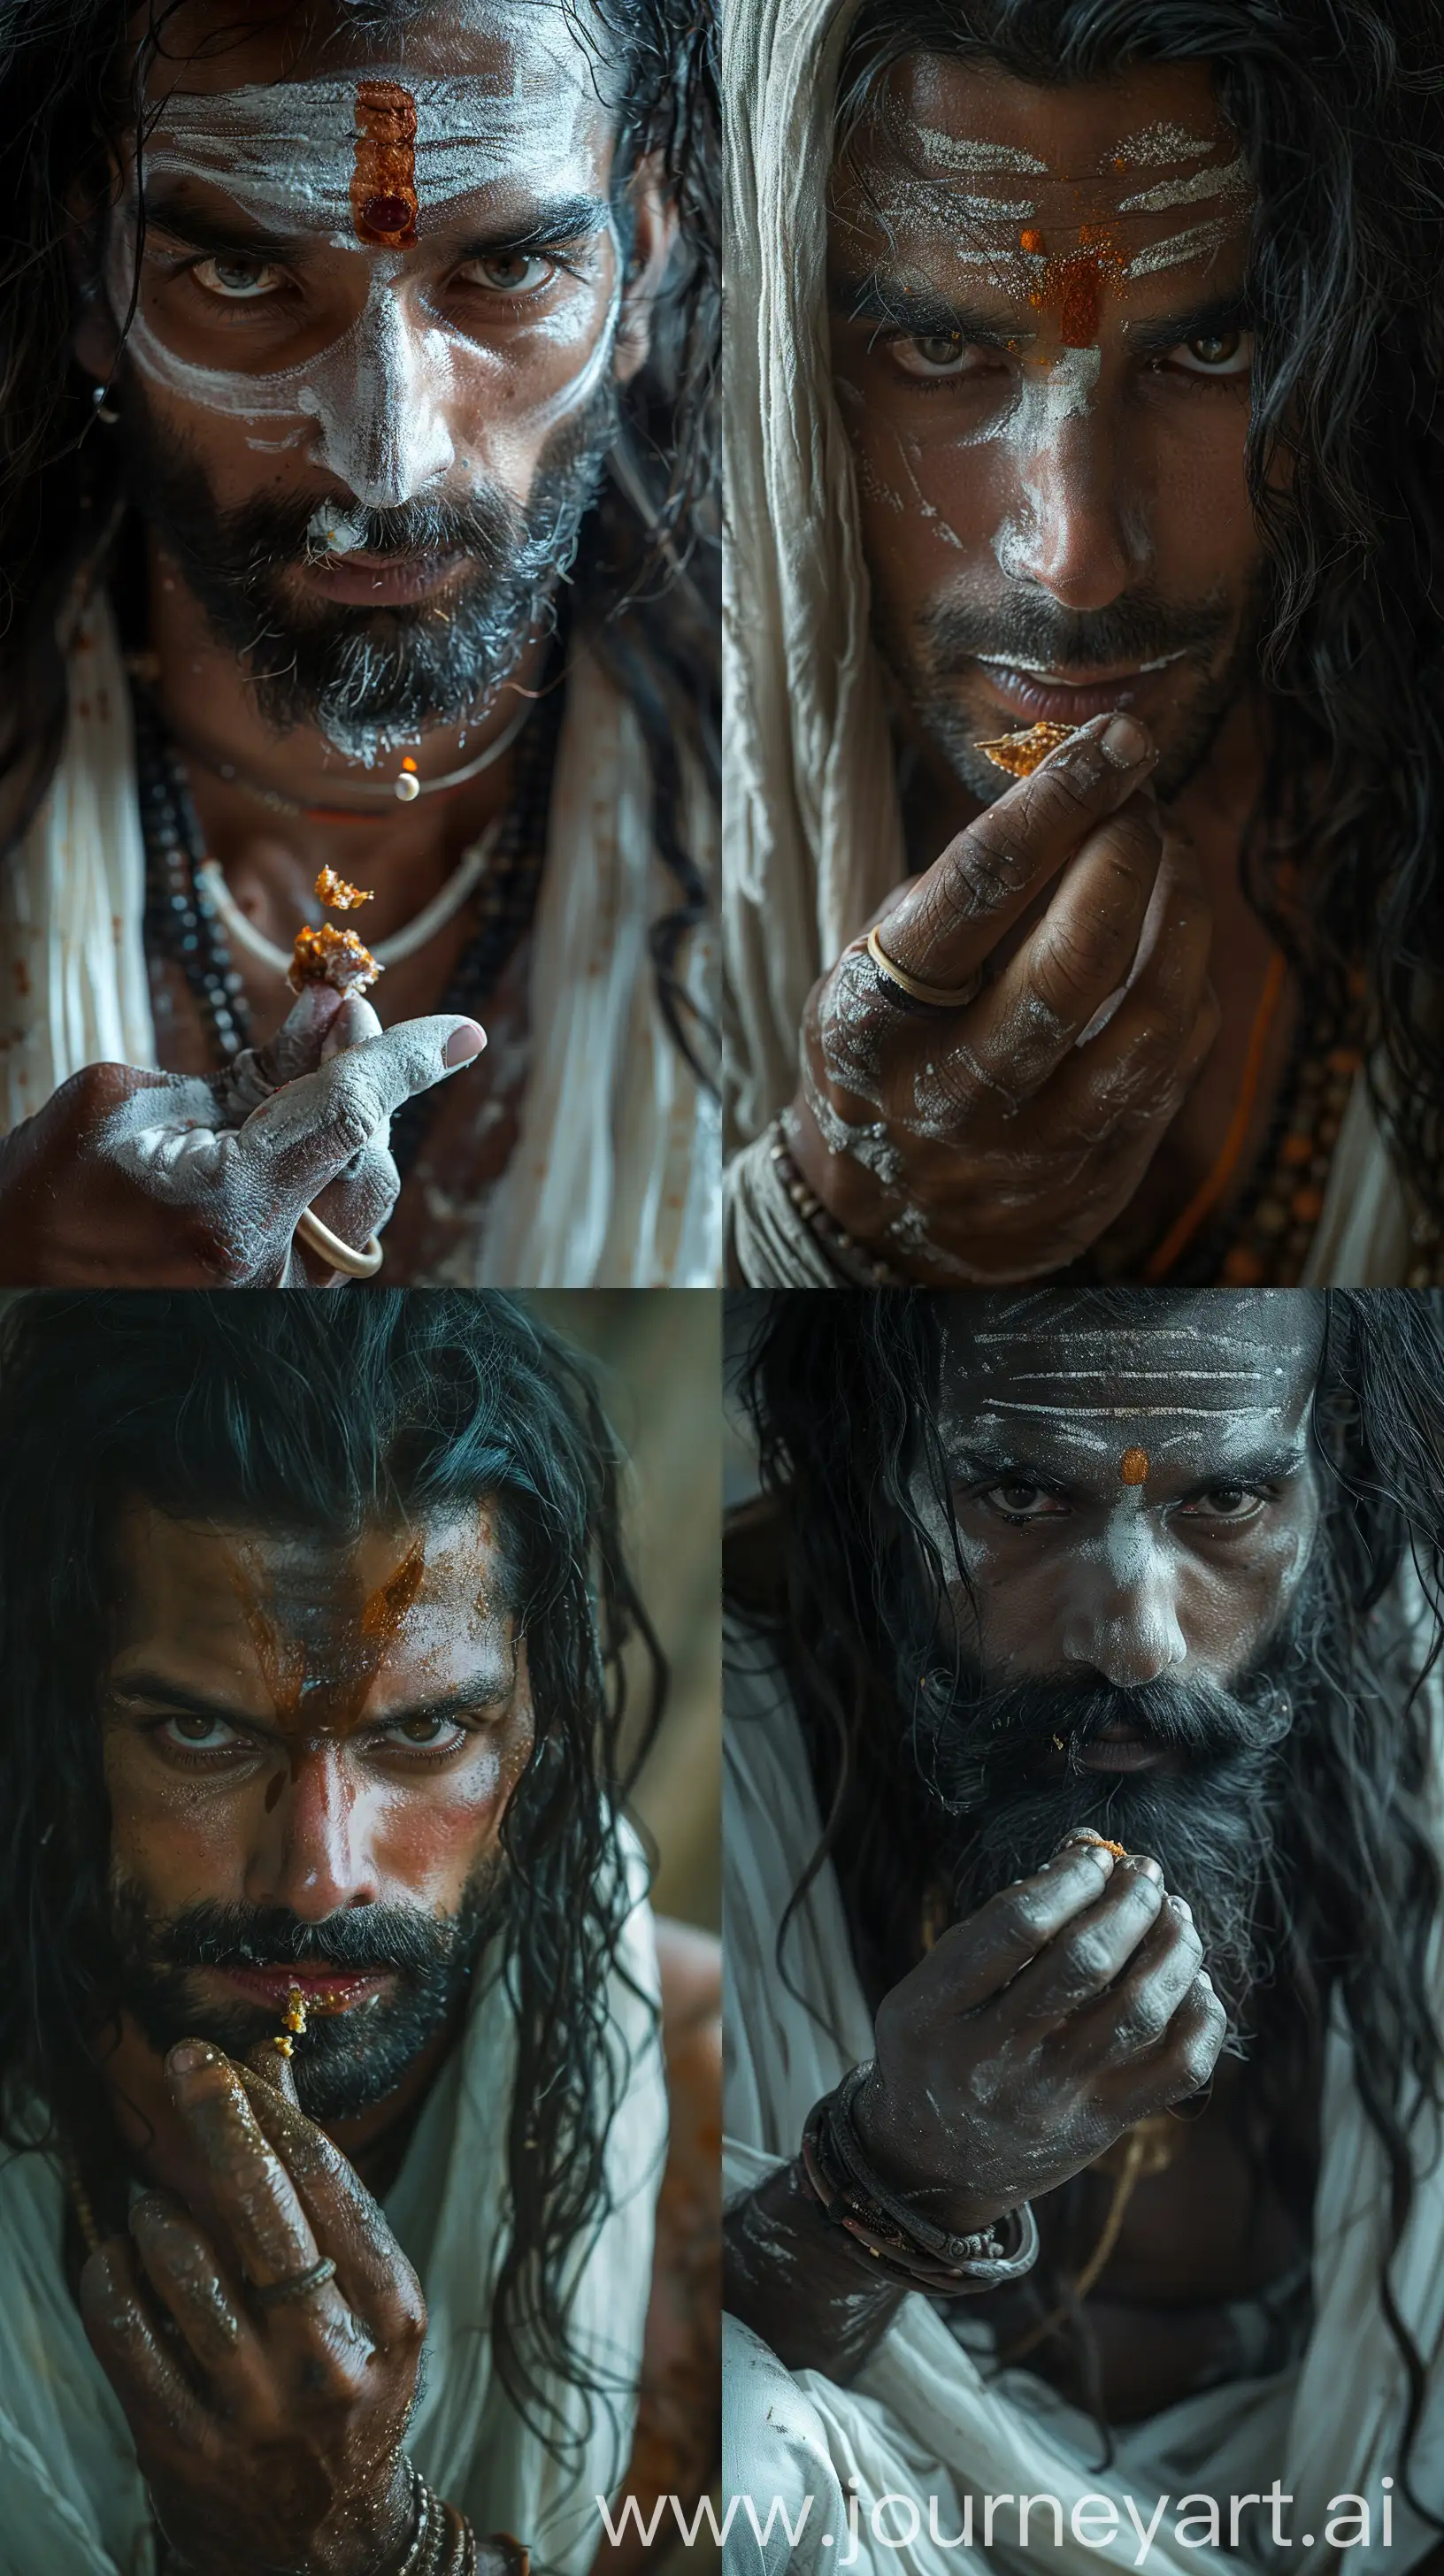 Ancient-Indian-Man-in-White-Attire-Taking-a-Bite-Detailed-CloseUp-Portrait